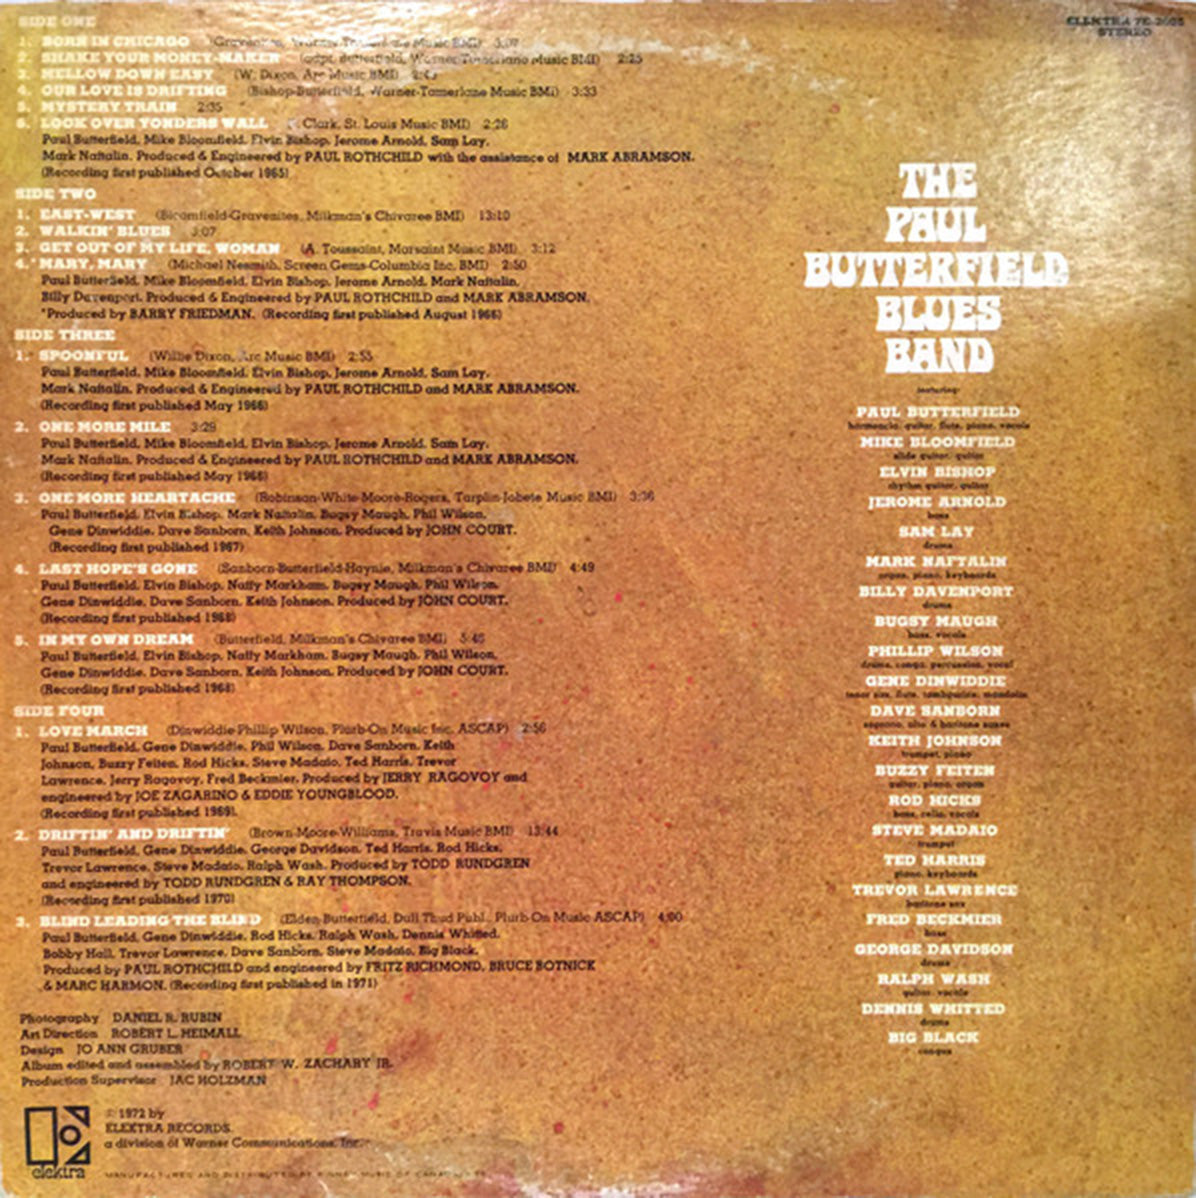 The Paul Butterfield Blues Band – Golden Butter, The Best Of -  1972 Rare in Shrinkwrap!